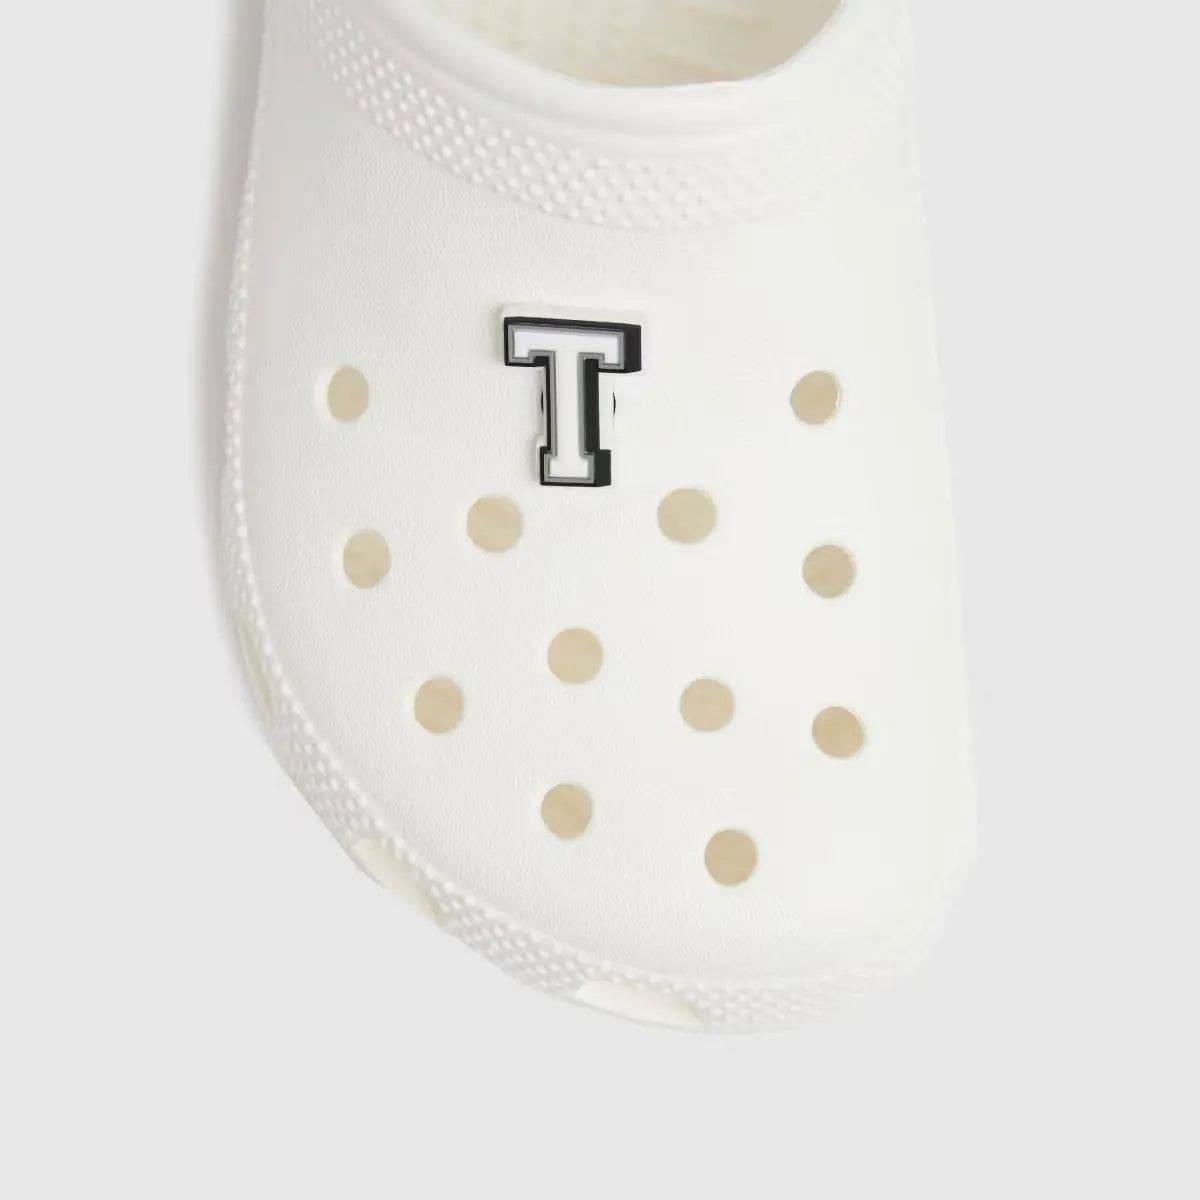 Crocs Glow-in-the-Dark Letter T Jibbitz, attached to a white Crocs shoe. The letter T glows brightly in the dark.